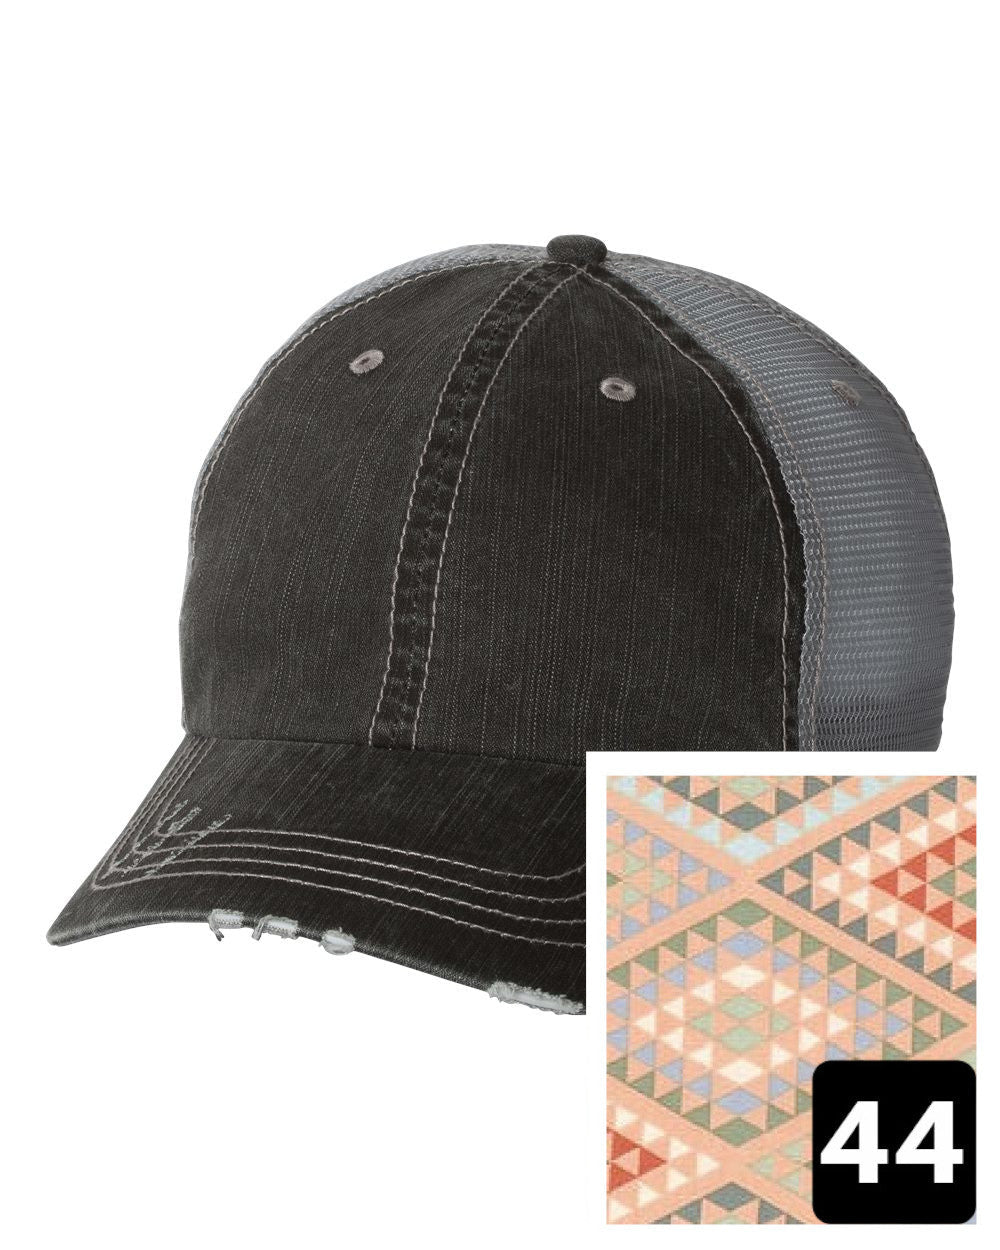 gray distressed trucker hat with navy coral and white chevron fabric state of Wisconsin